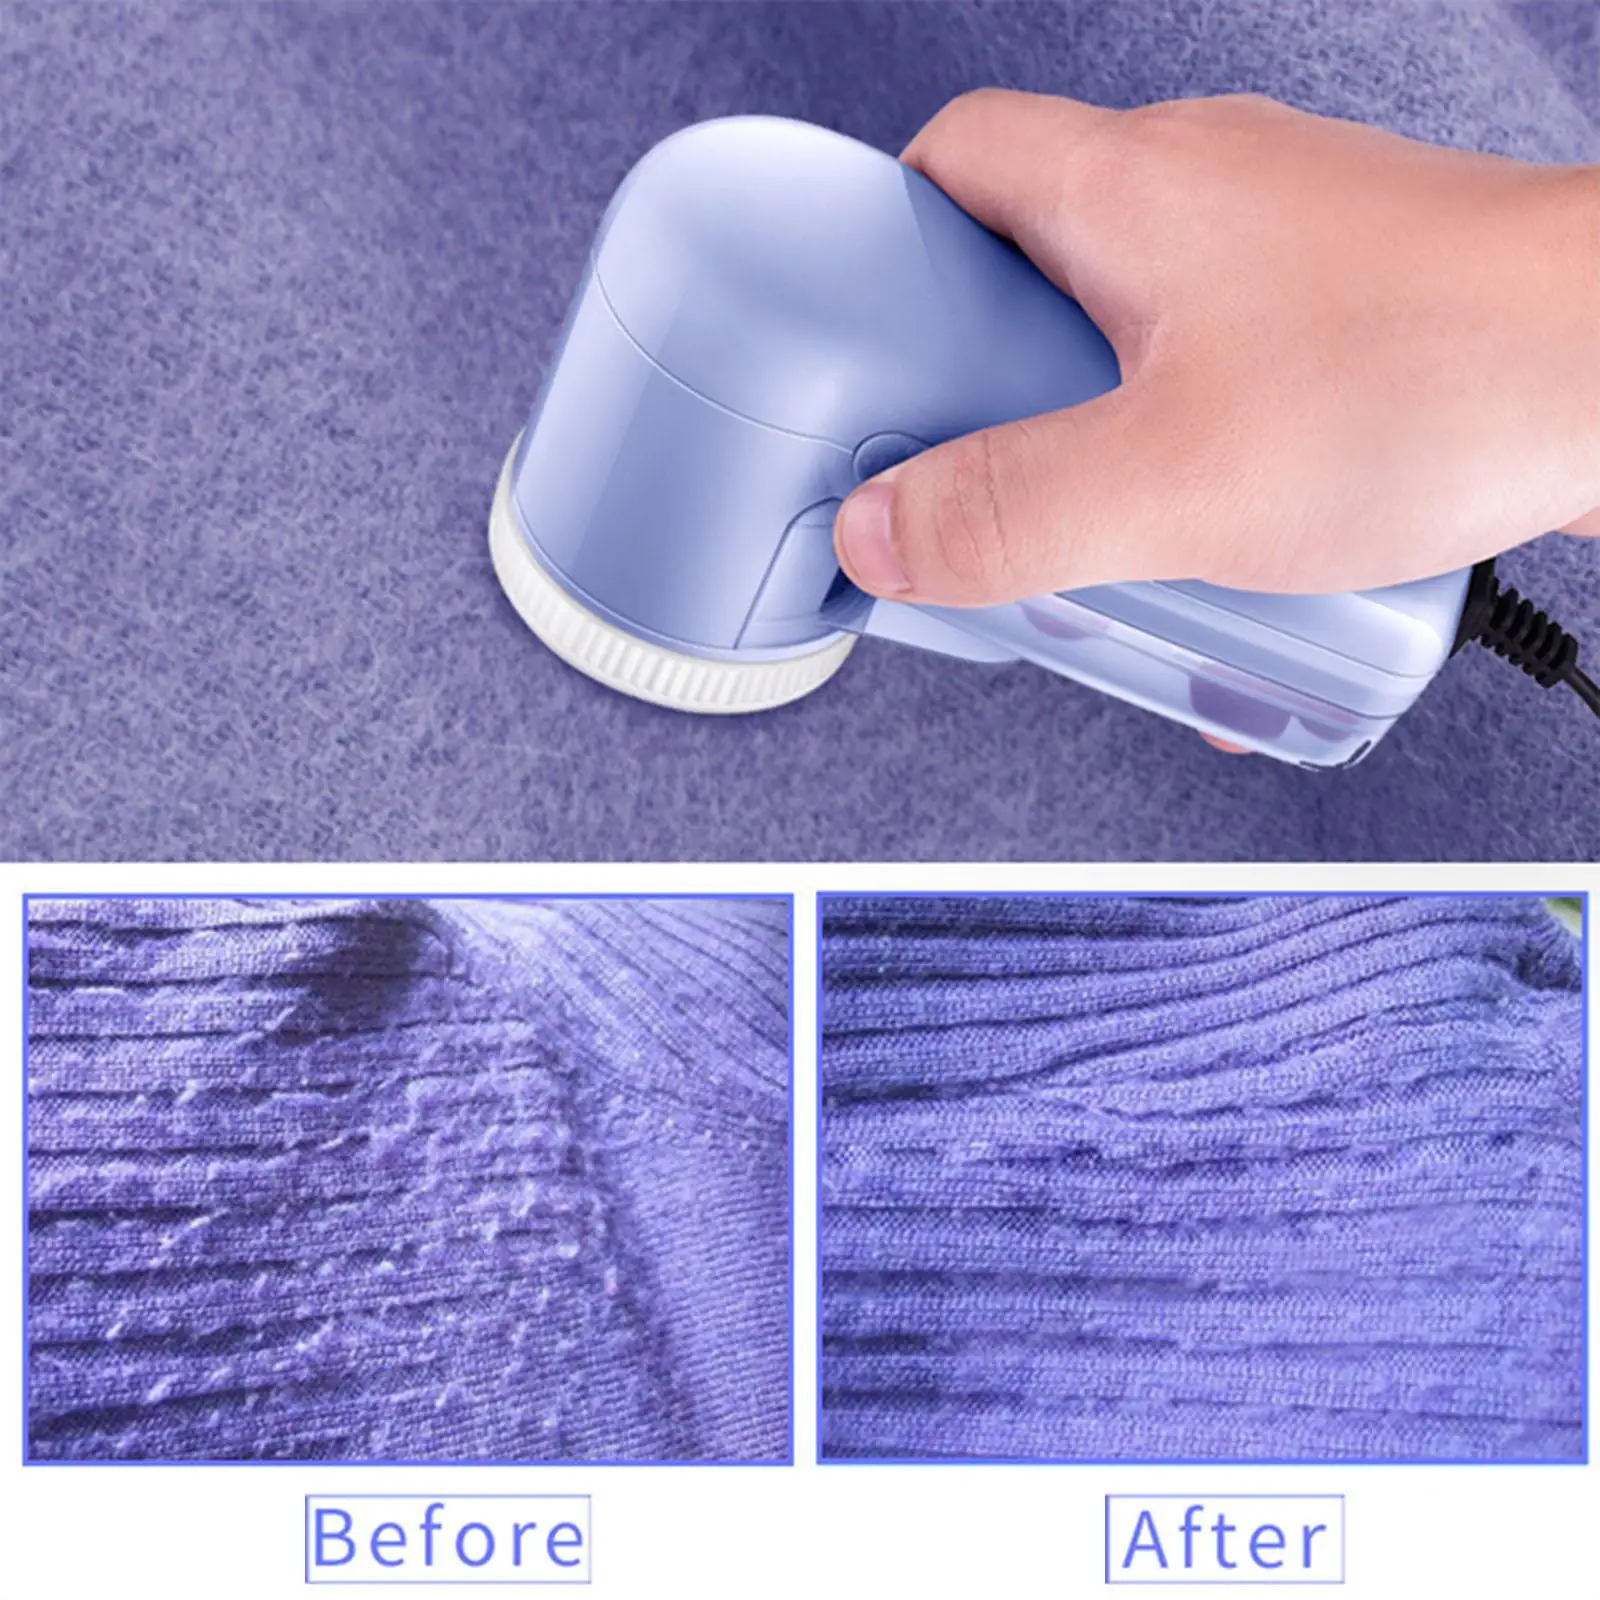 Lint Remover Removal Tool Sweater Shaver Removal Trimmer Shaver Defuzzer for Blanket Synthetic Fibers Bedding Cashmere Clothes